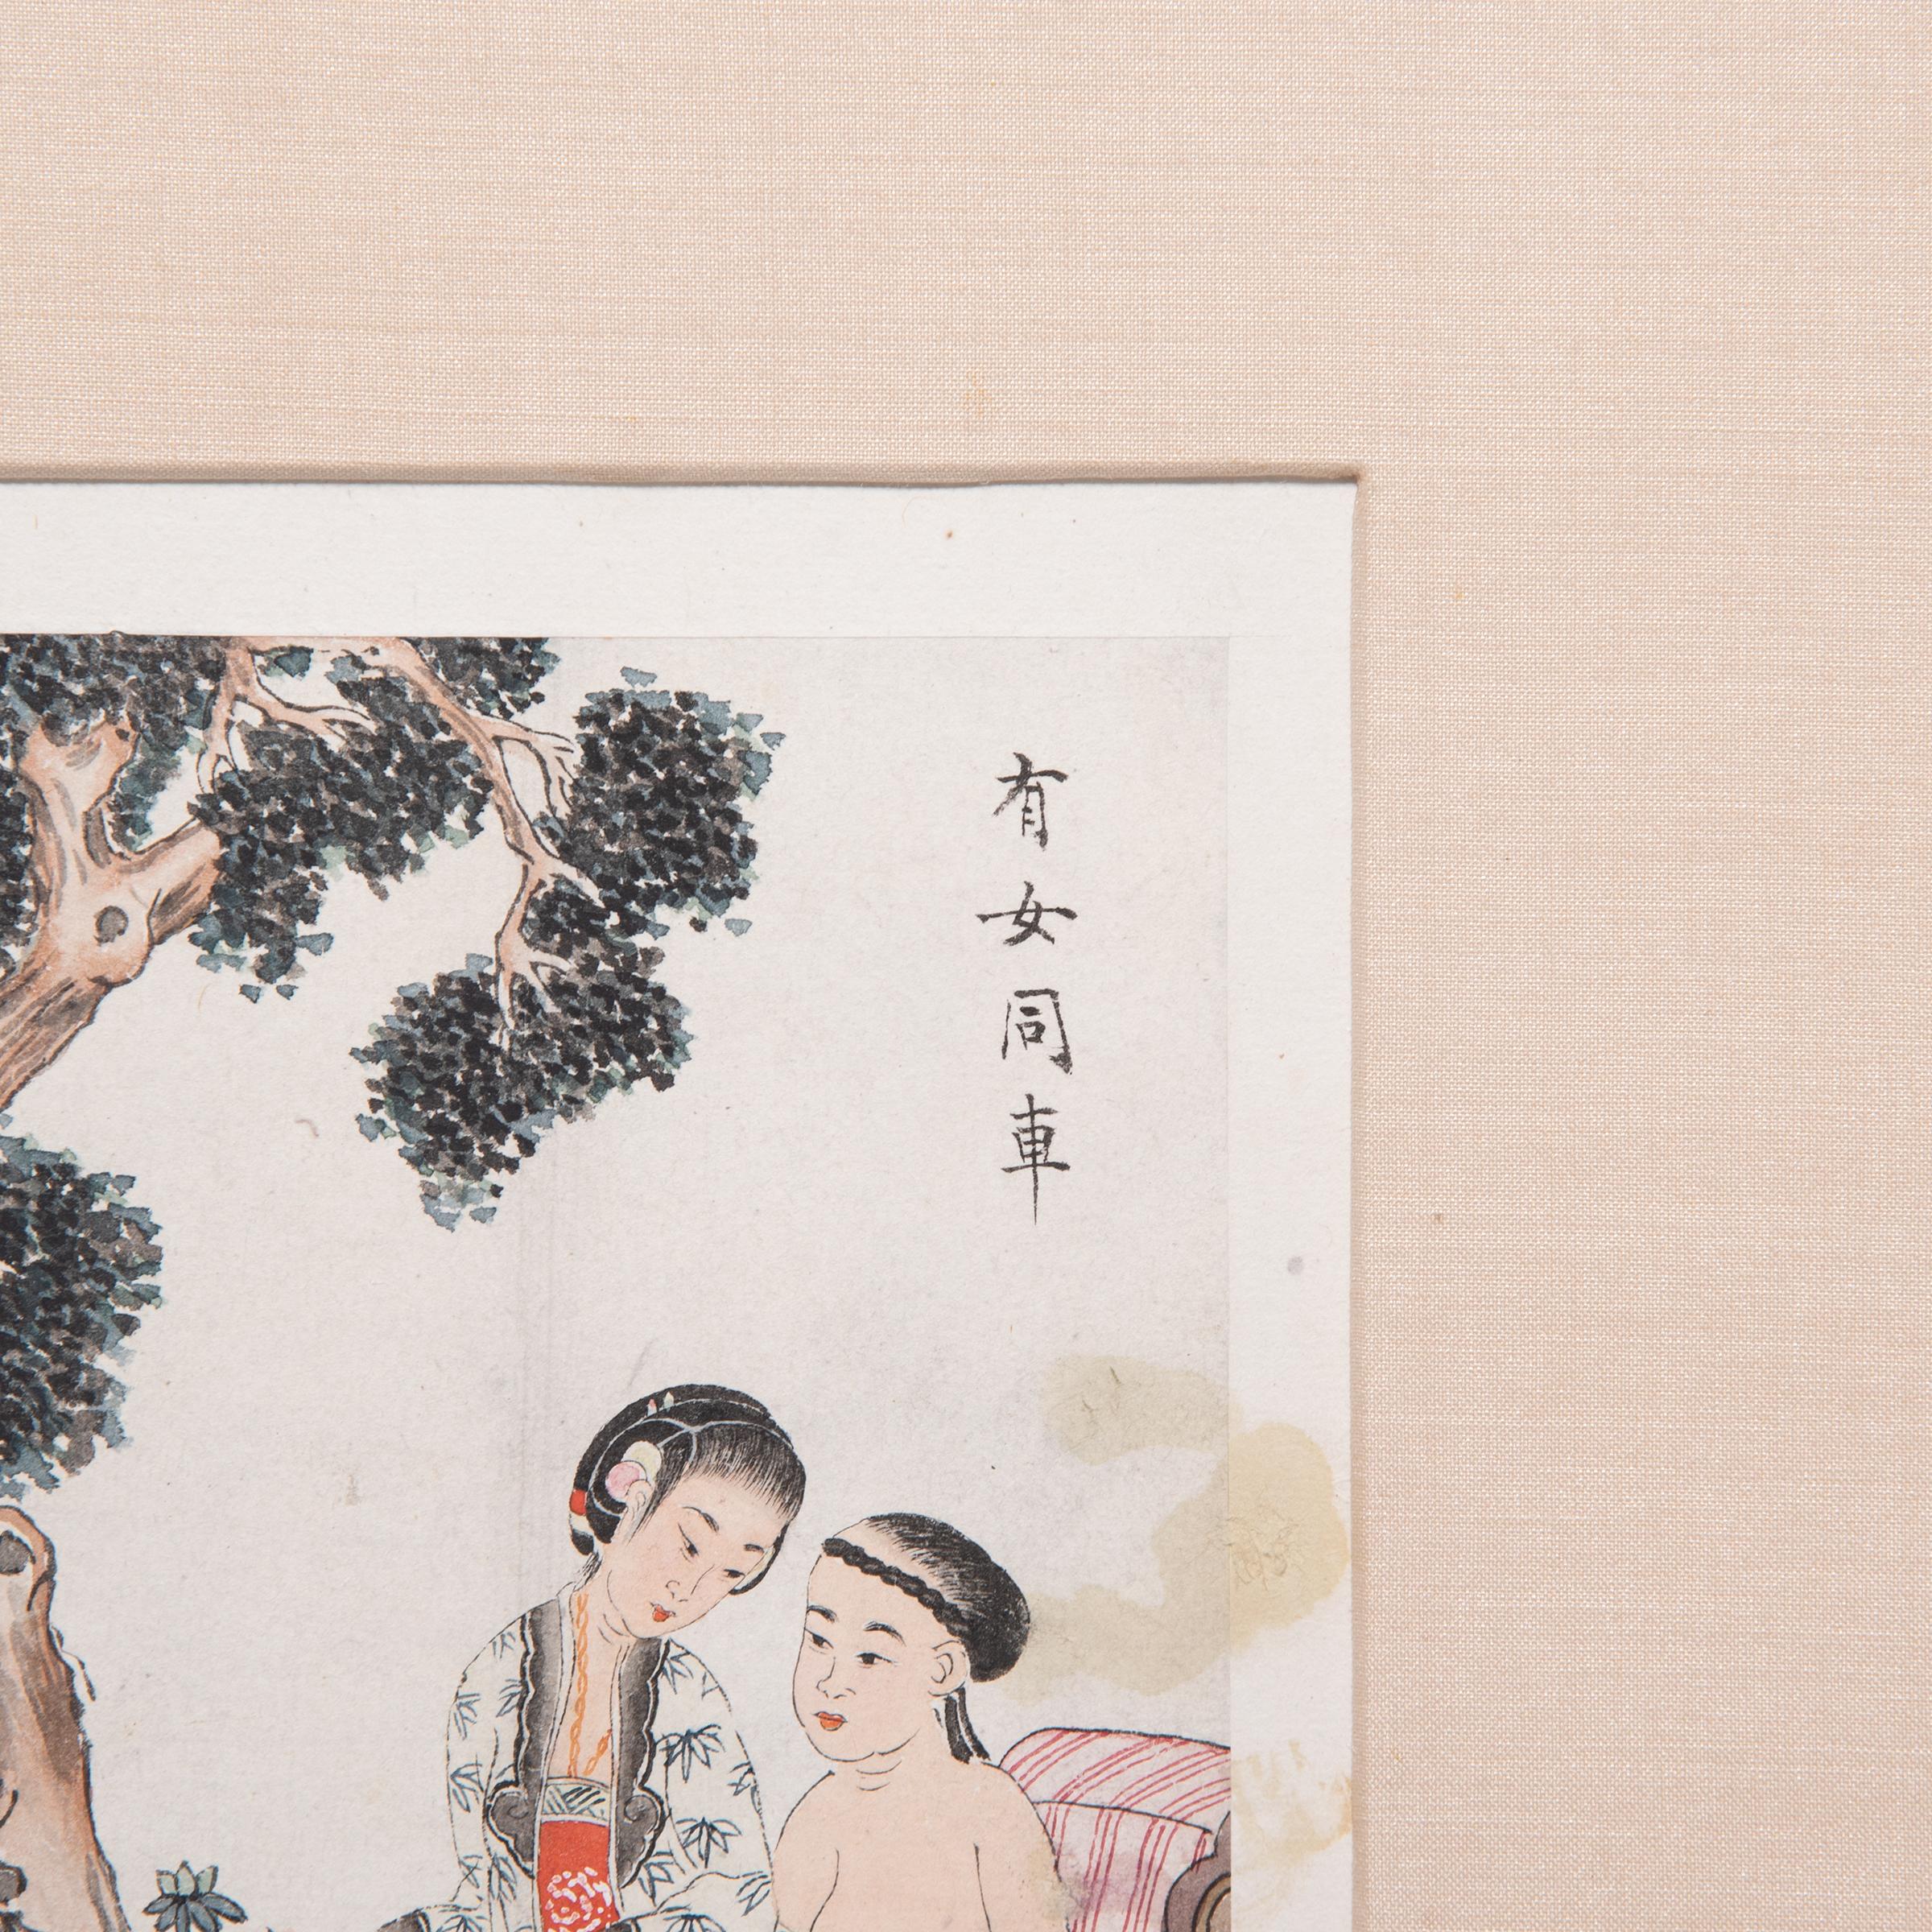 Chinese Erotic Album Leaf, c. 1850 - Qing Art by Unknown